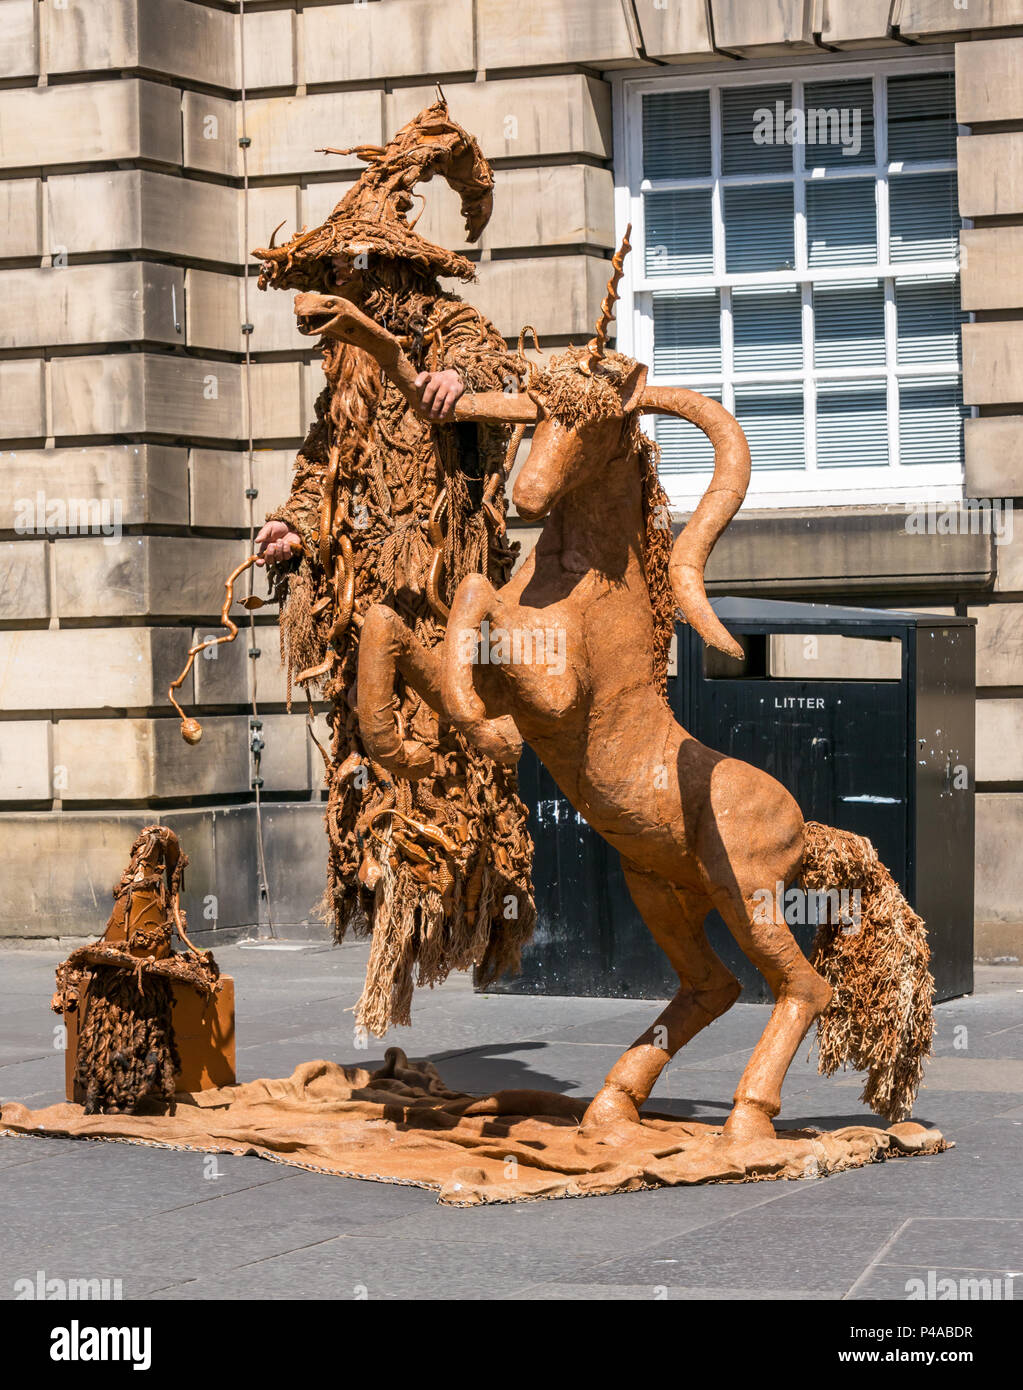 Edinburgh, Scotland, United Kingdom, 21st June 2018. A street performer in a levitation act dressed as a living statue of Gandalf the Wizard with a unicorn to entertain passers by on the Royal Mile during the Summer season Stock Photo